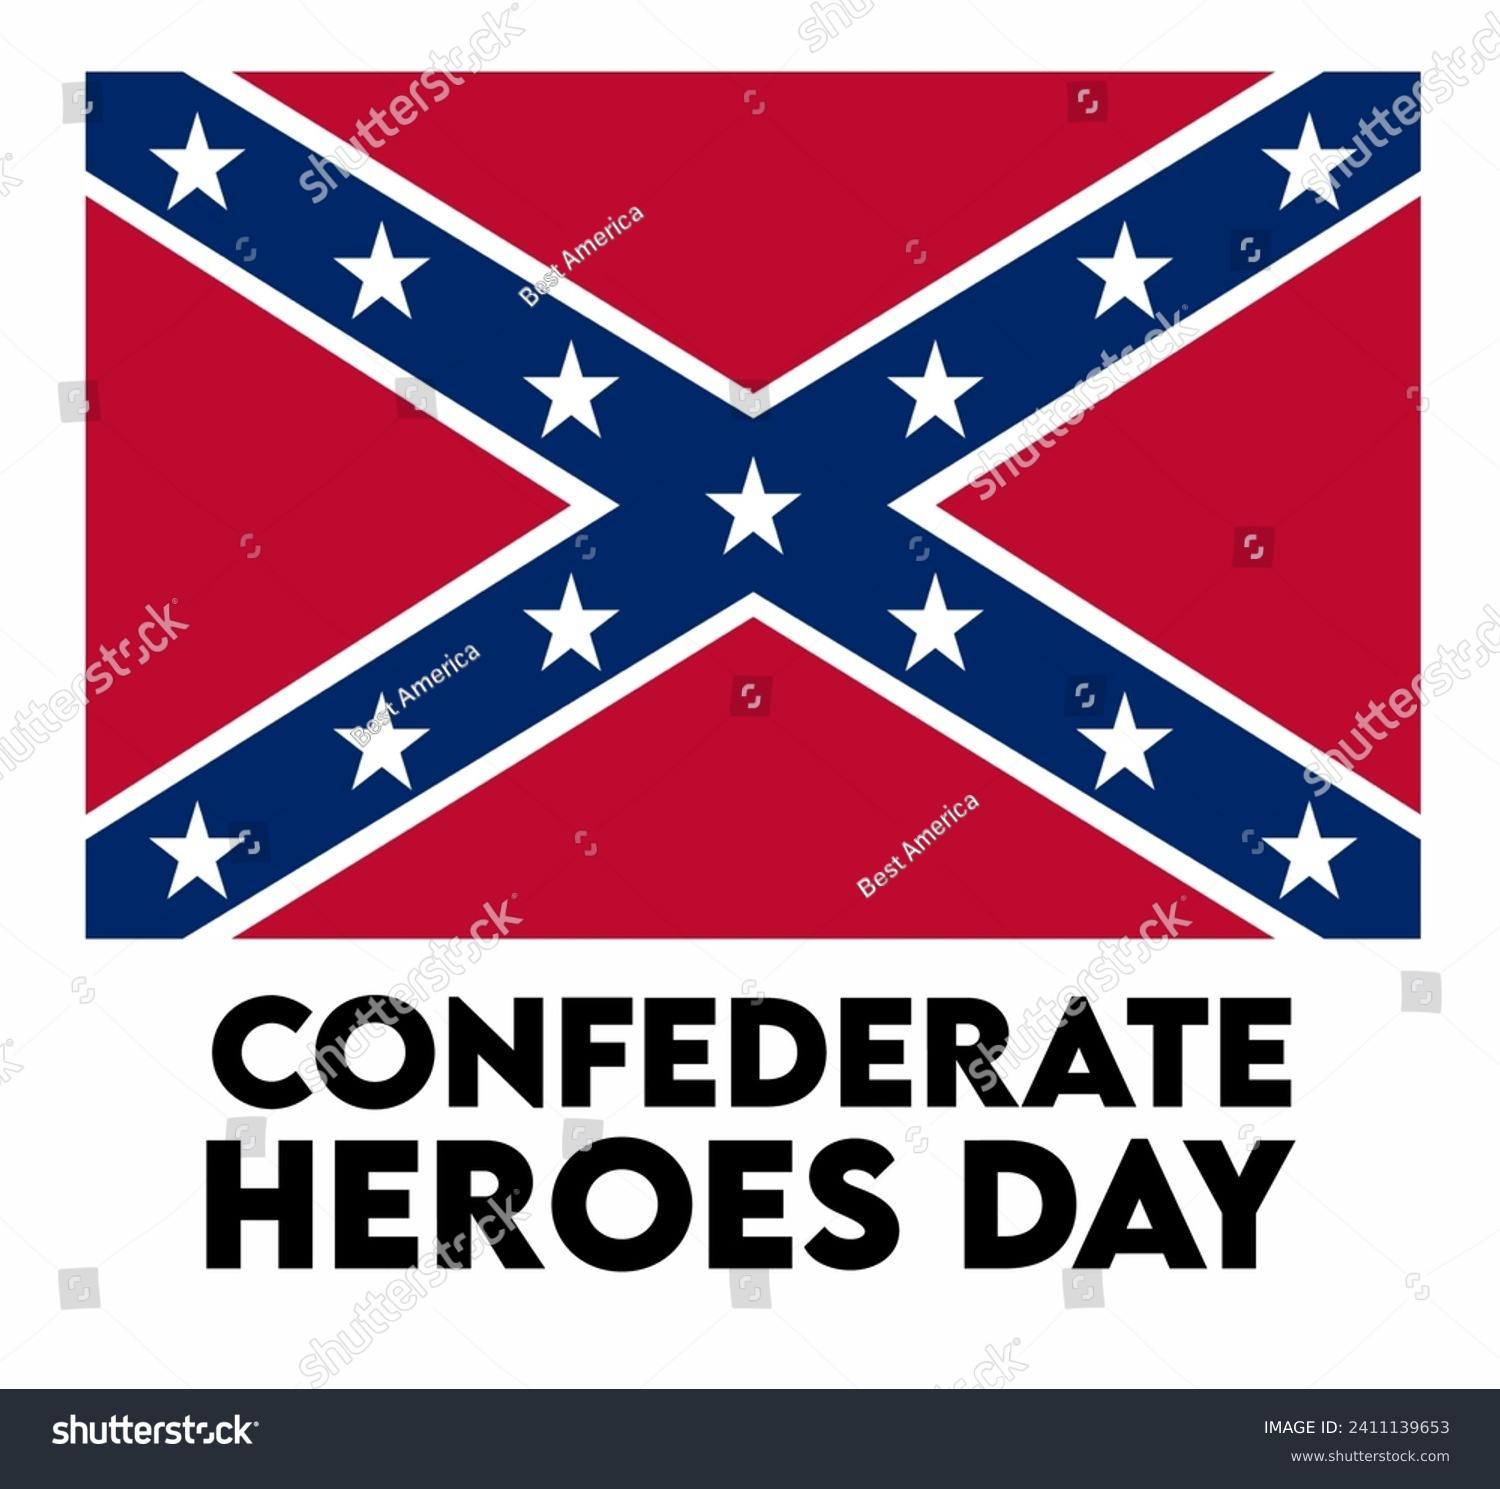 SVG of Confederate Memorial Day Remember and Honor svg